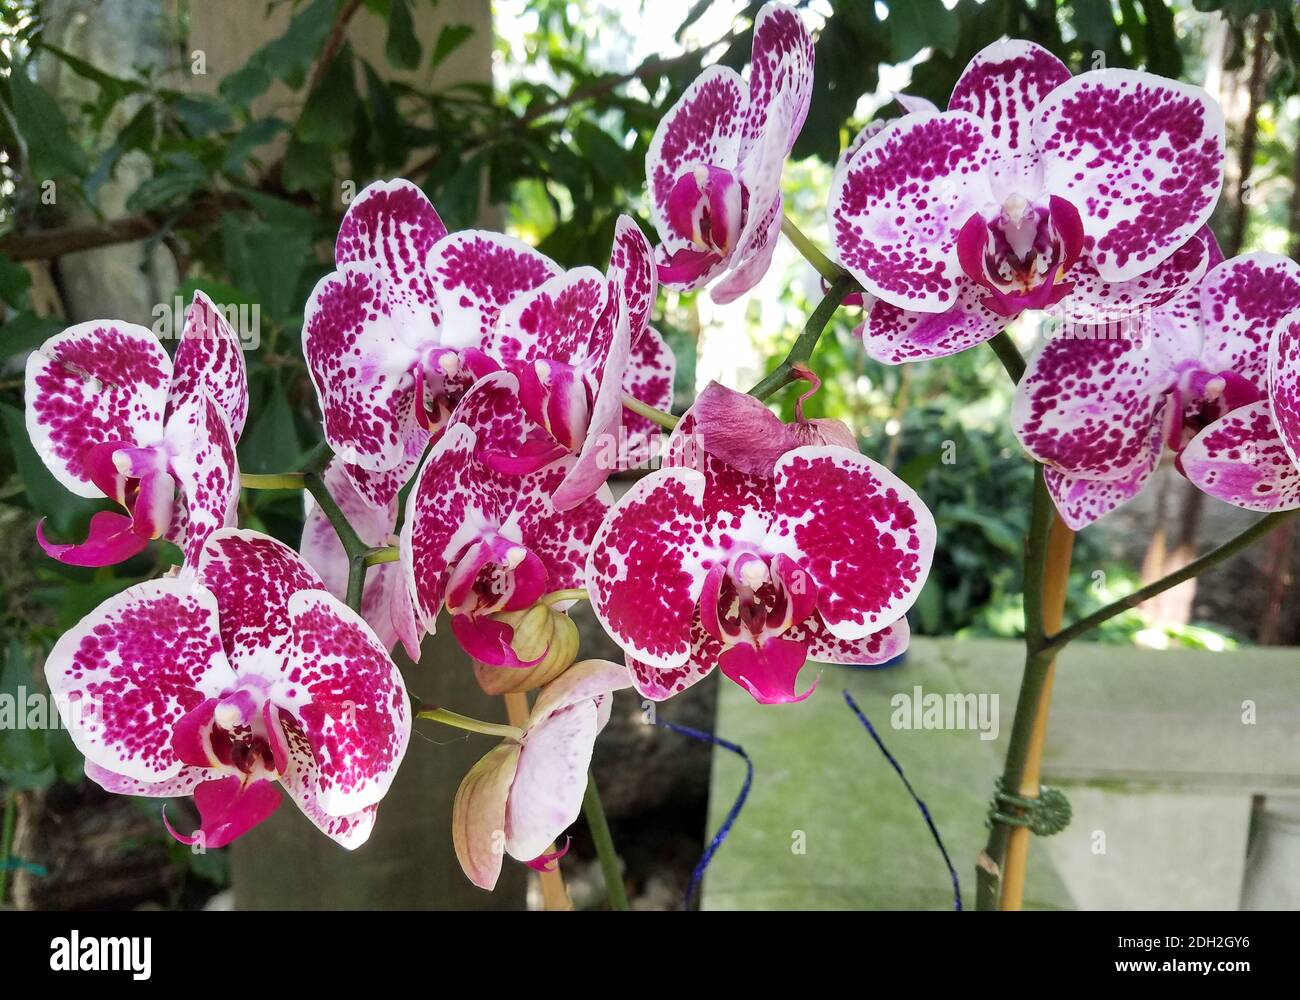 Close-up on a multicolored orchid bloom with red, white, and maroon spotted flowers Stock Photo